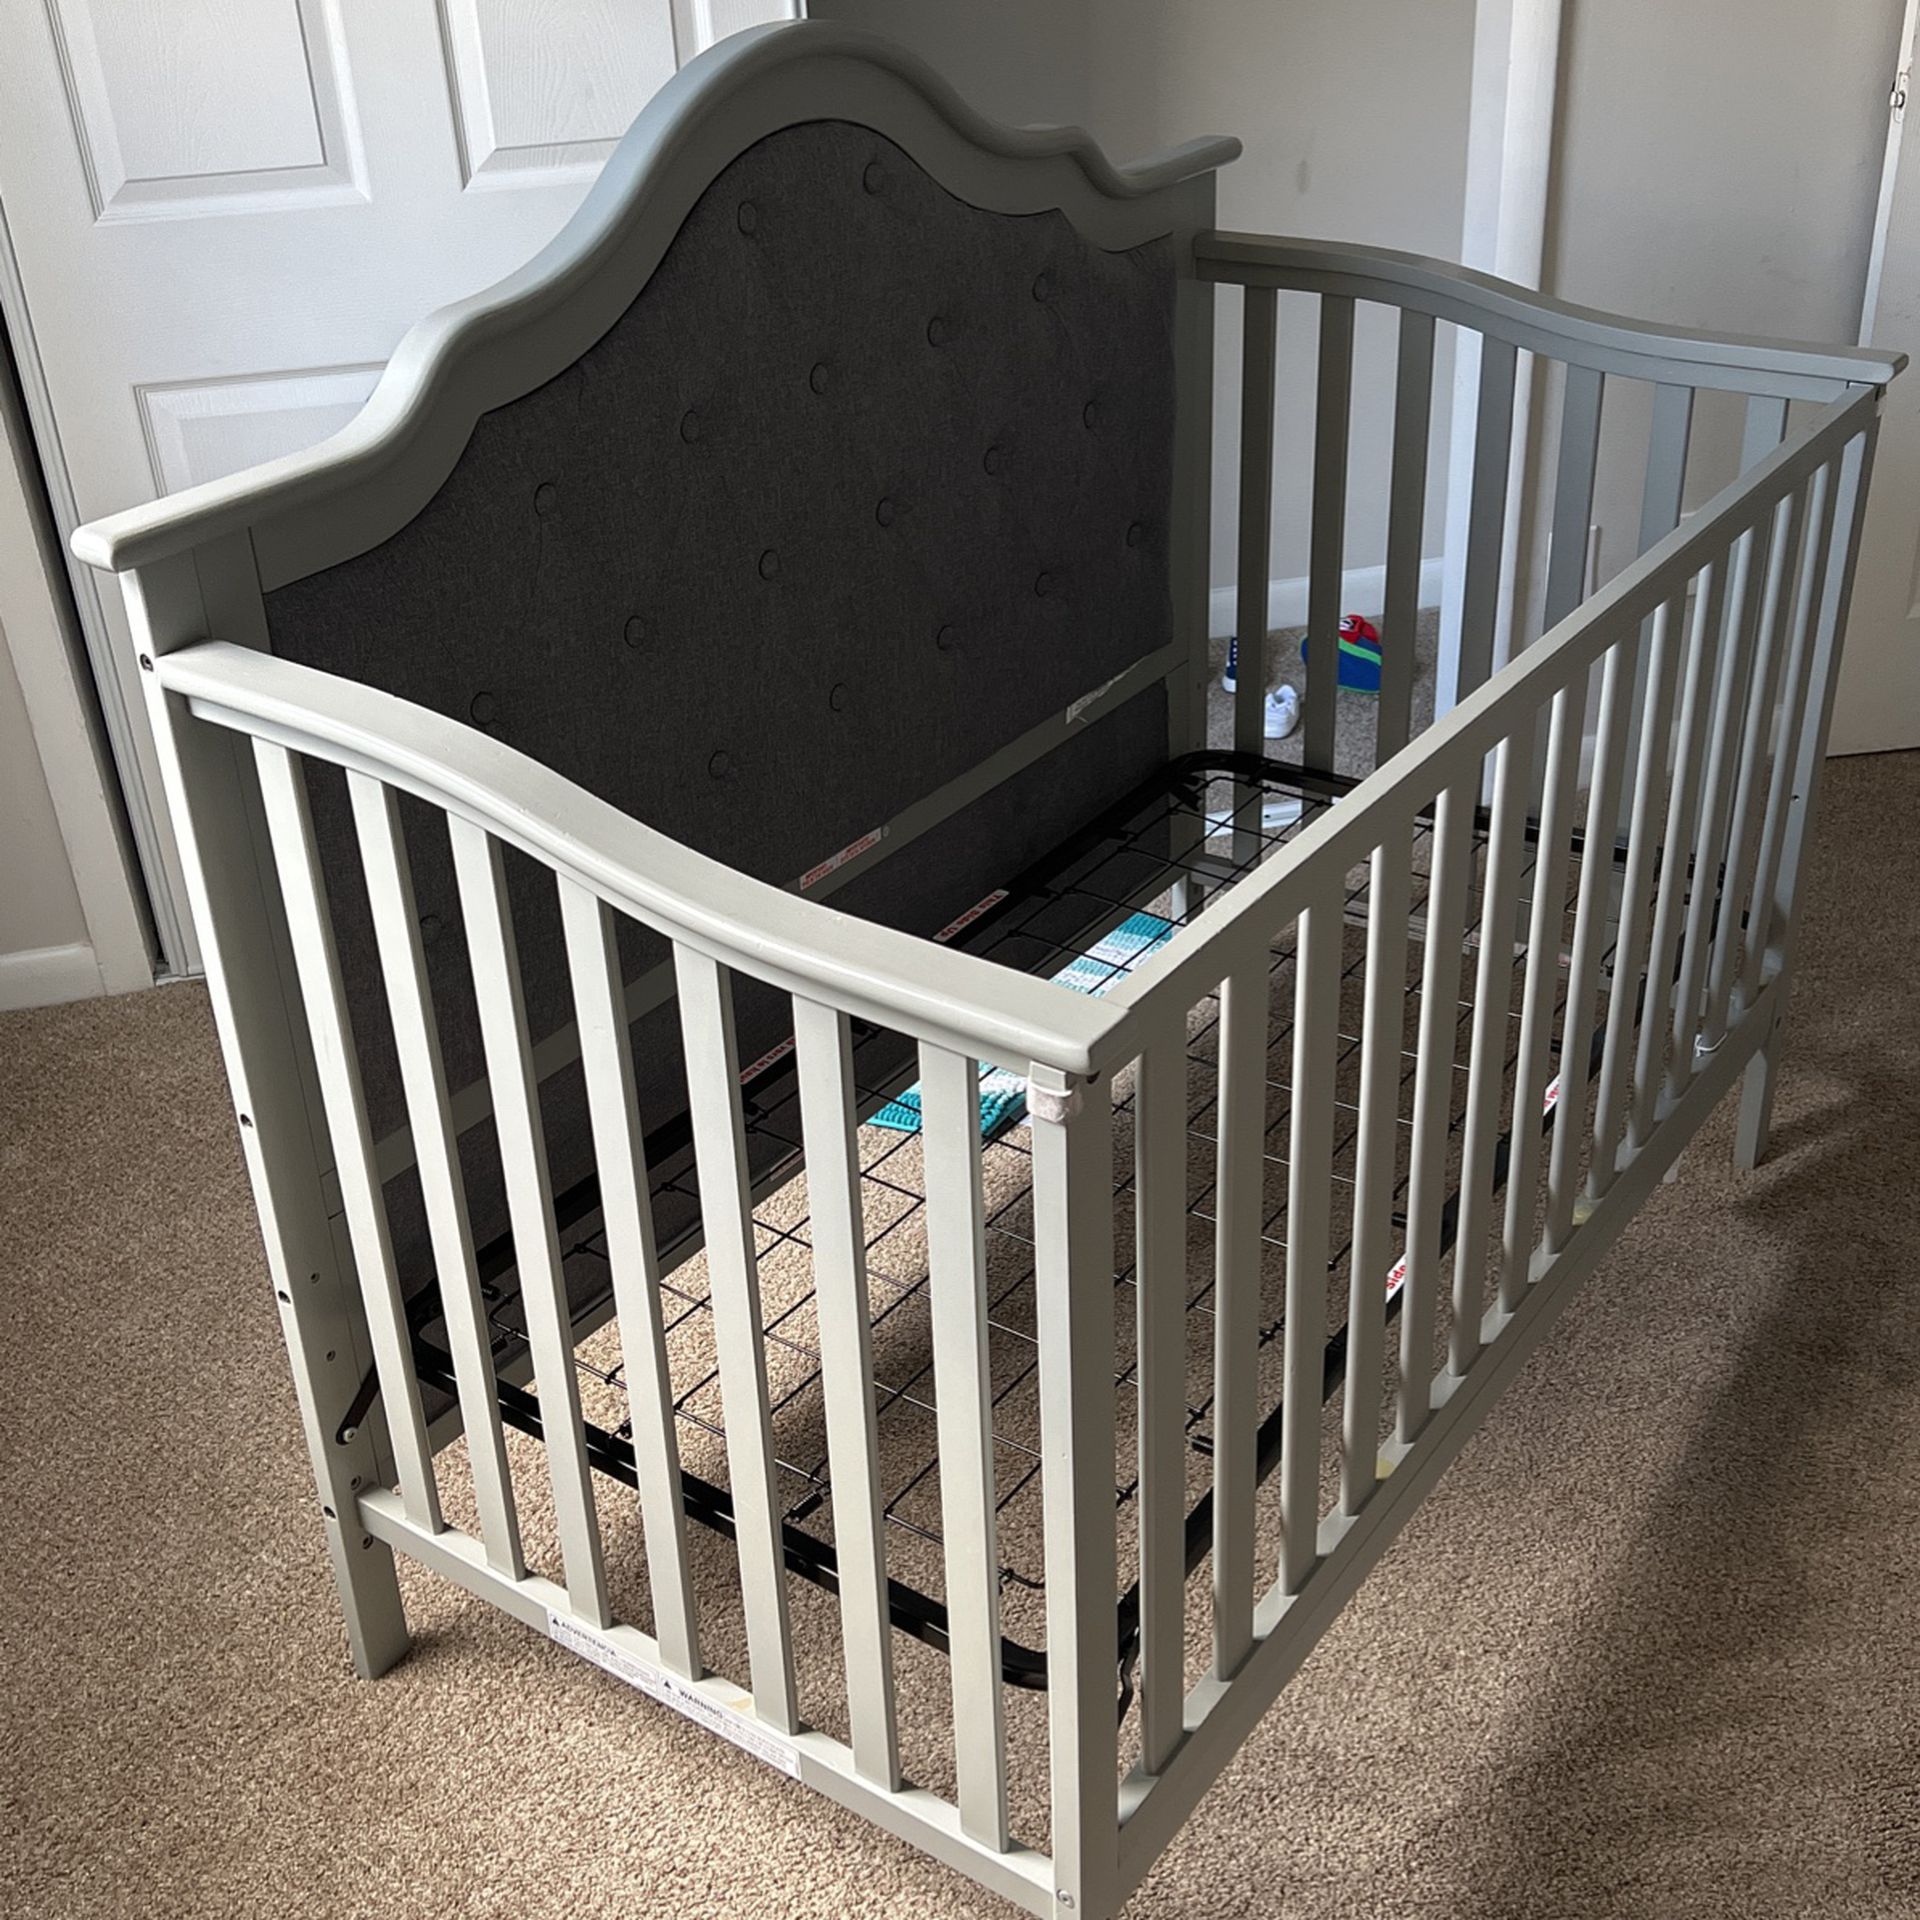 Baby Crib, Baby toys, Car seat NEED GONE! TODAY ONLY